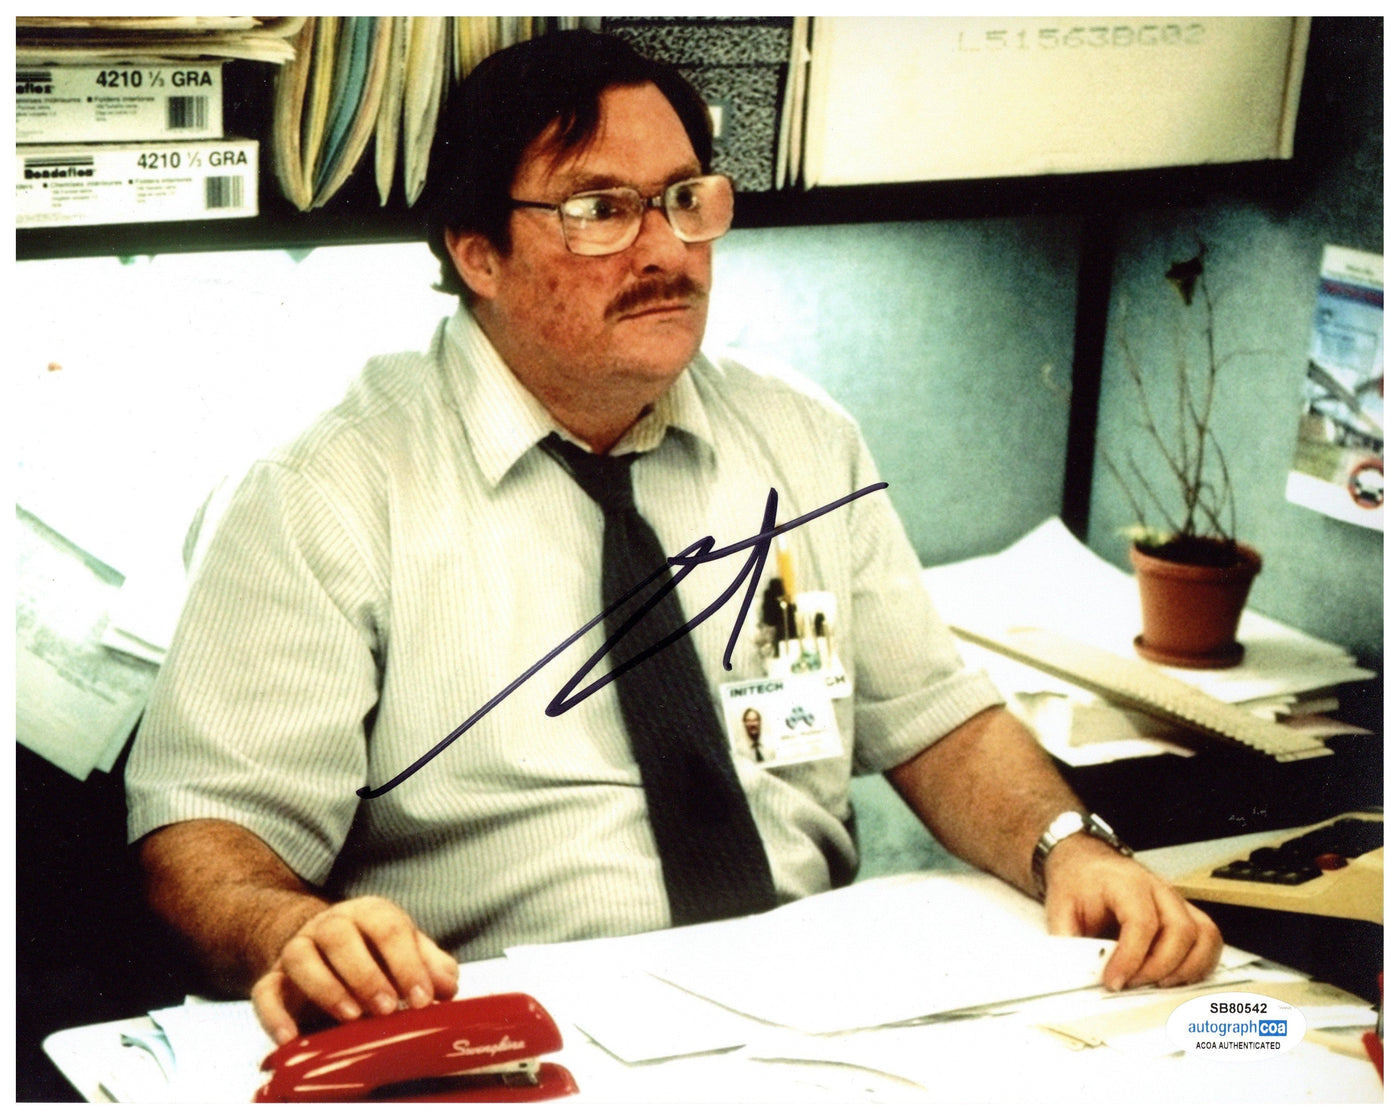 STEPHEN ROOT SIGNED 8X10 PHOTO OFFICE SPACE AUTOGRAPHED ACOA #7